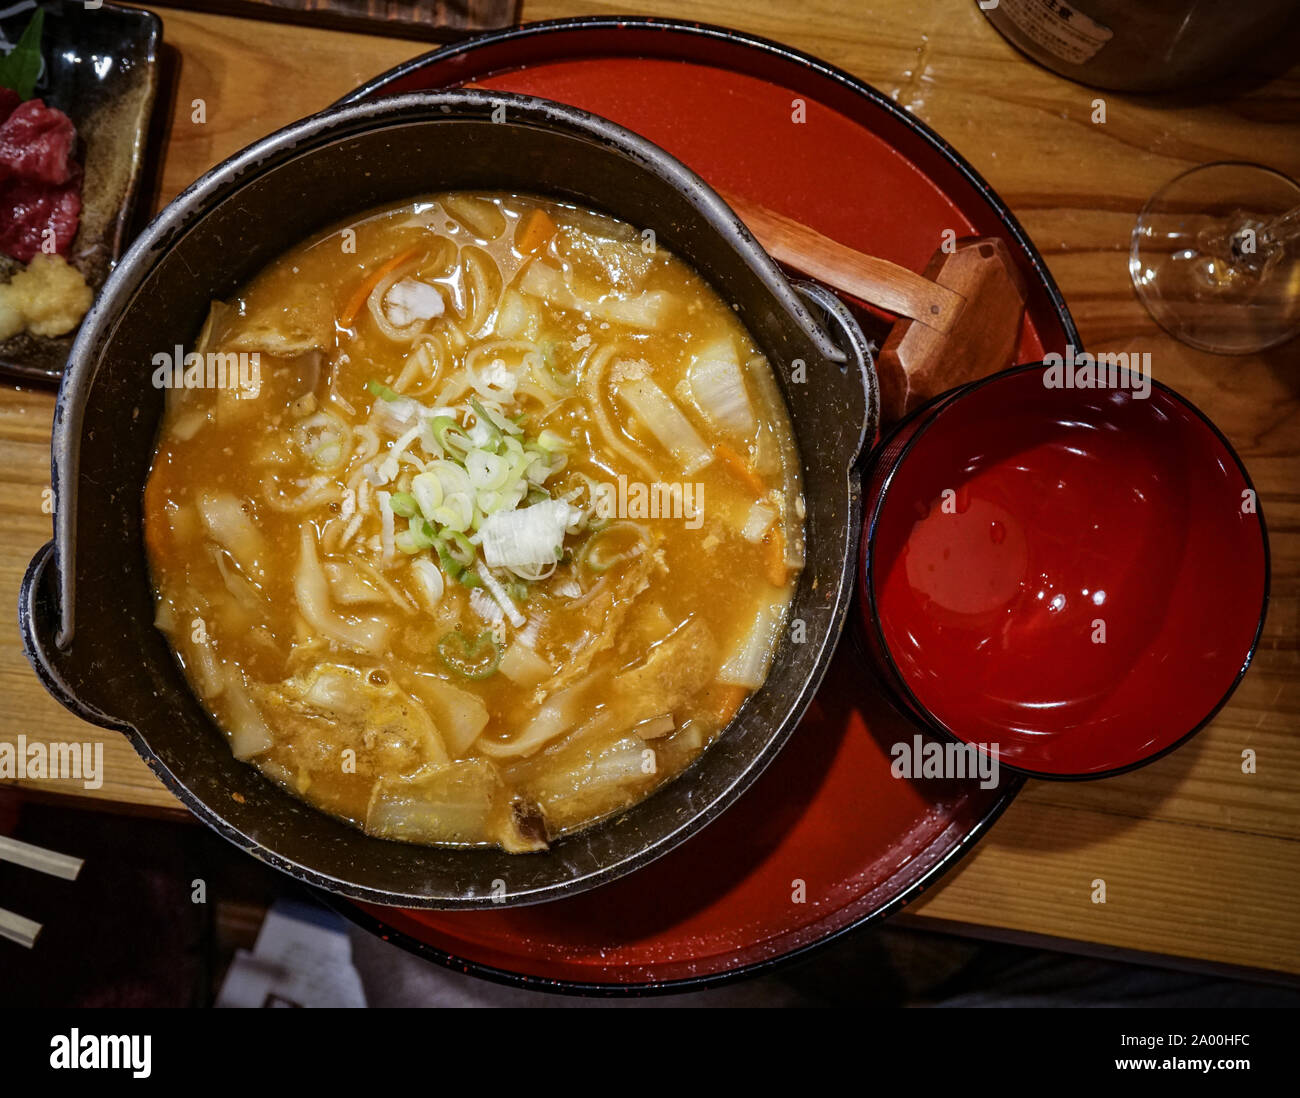 Hoto noodle soup from Yamanashi (Japan), with udon noodles and vegetables in miso soup Stock Photo